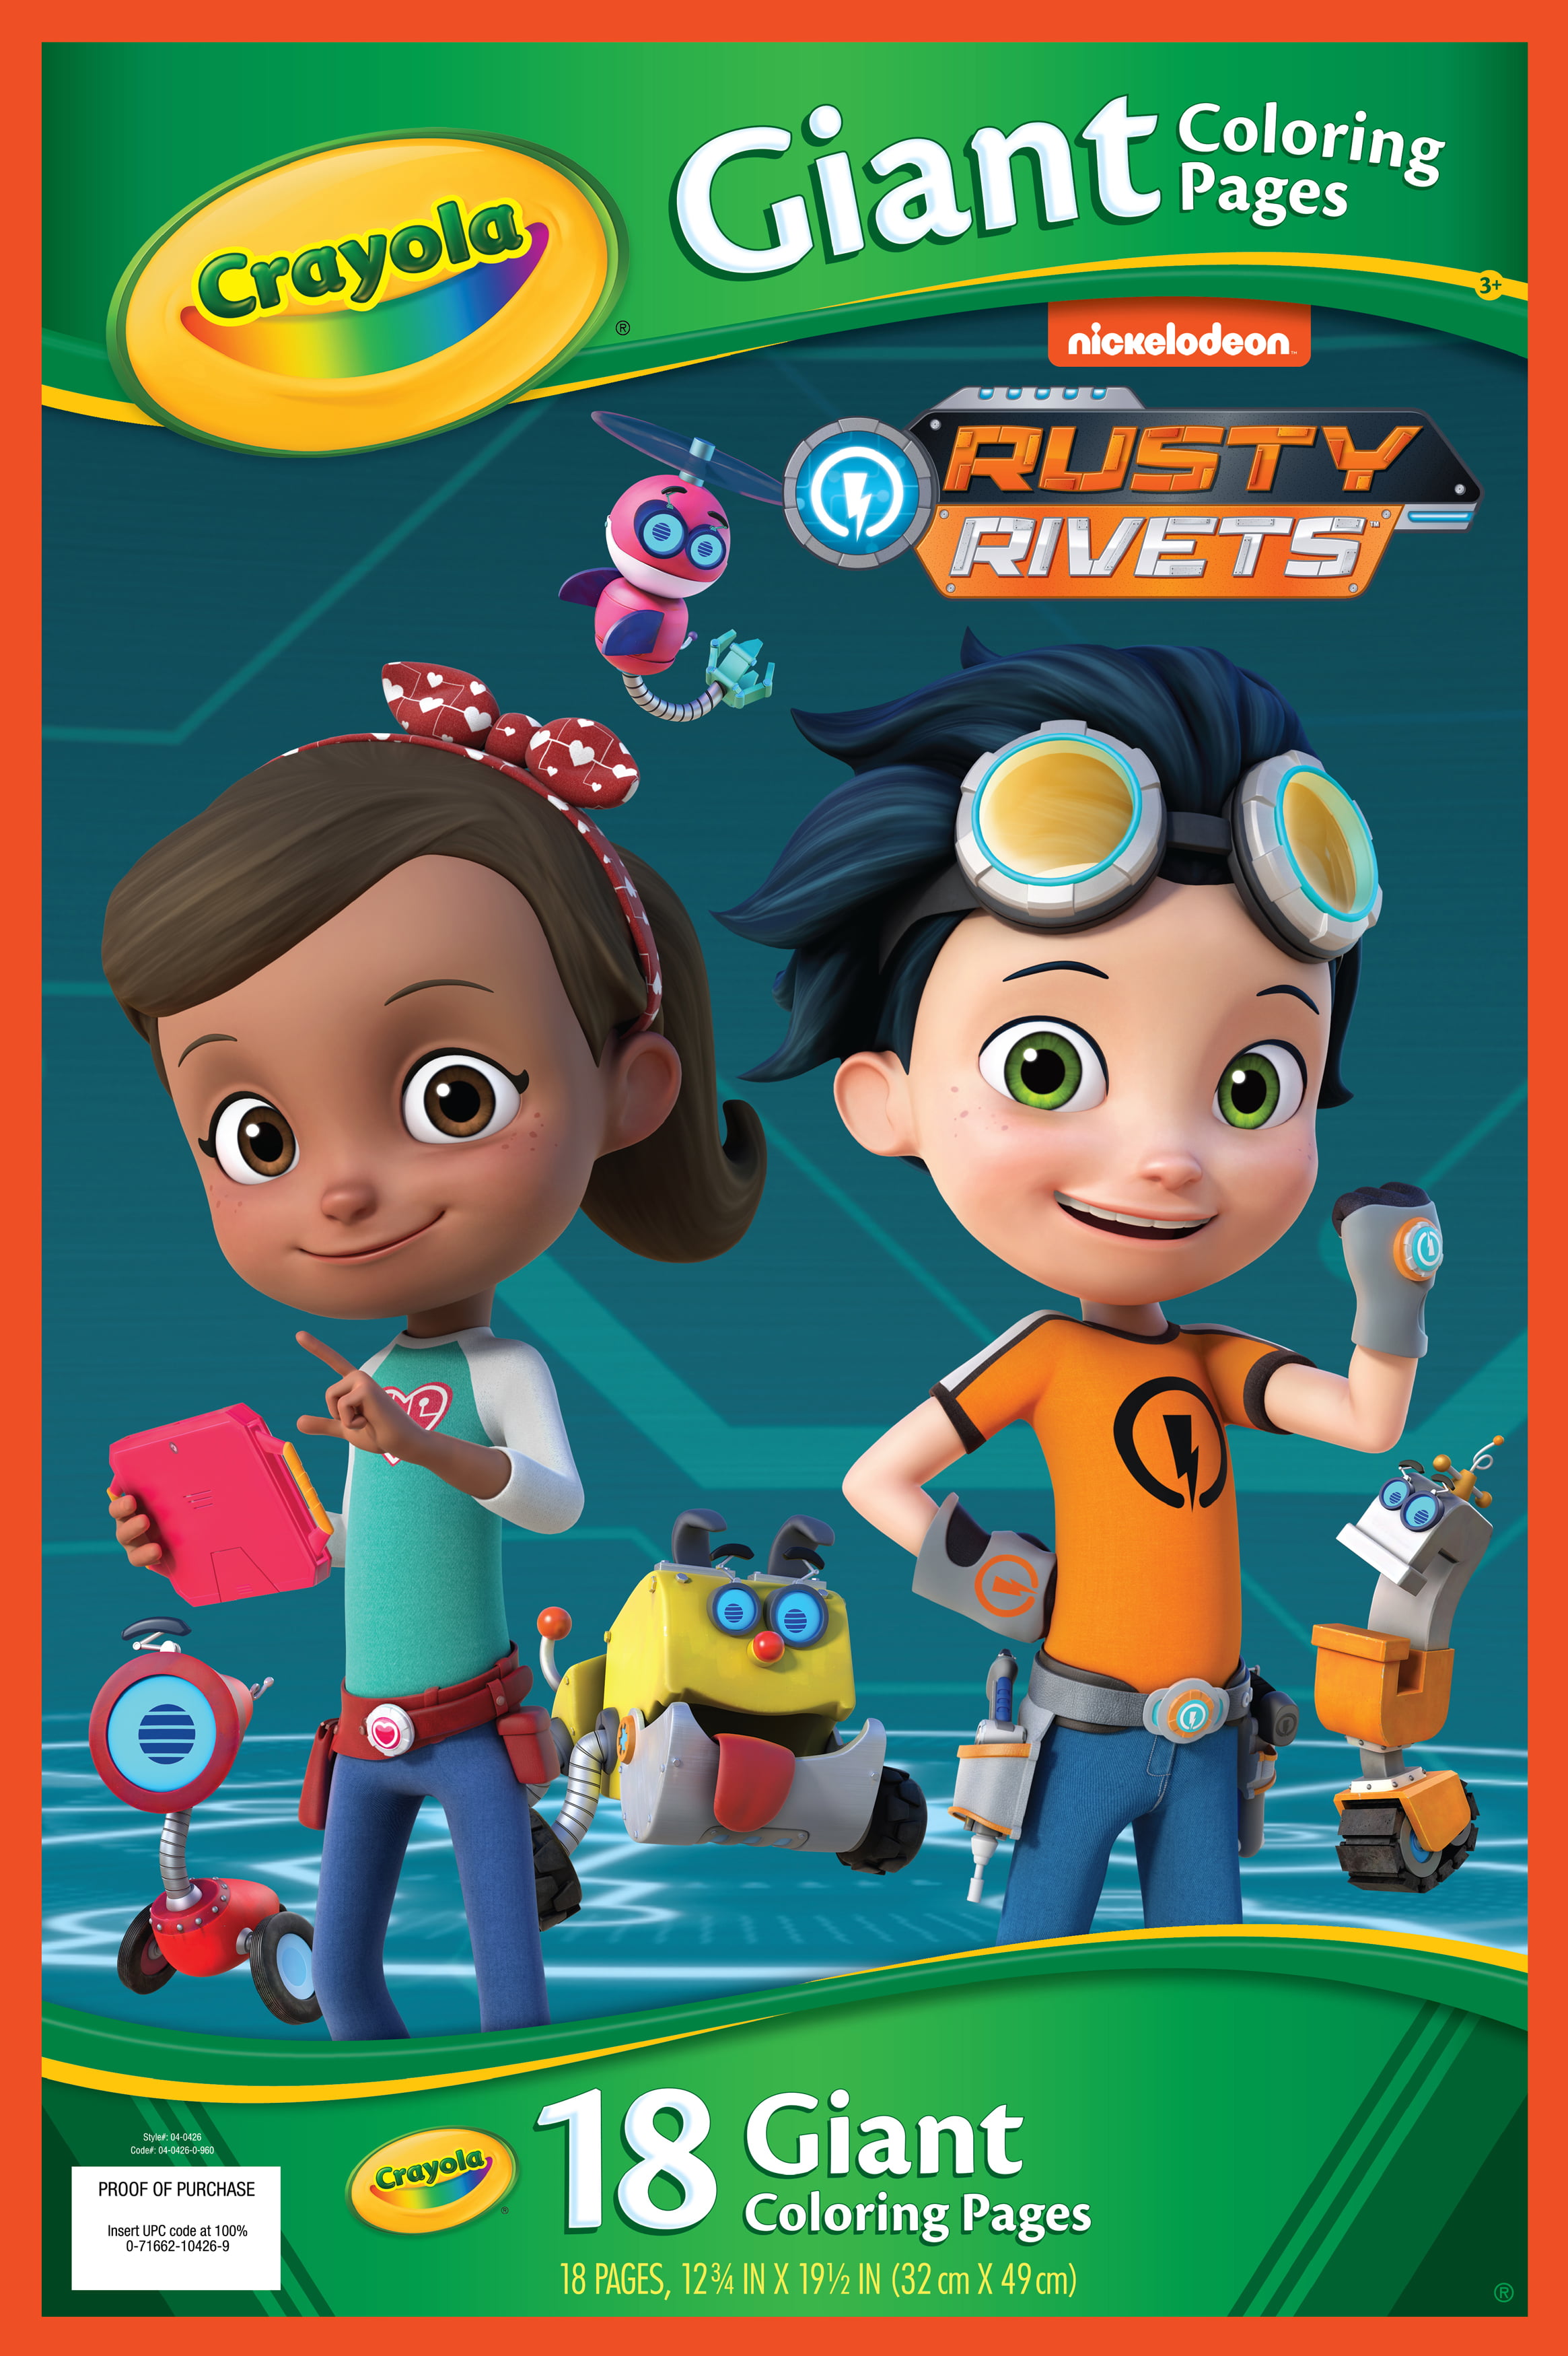 Download Crayola Giant Coloring Pages 12.75"X19.5"-Rusty Rivets ...